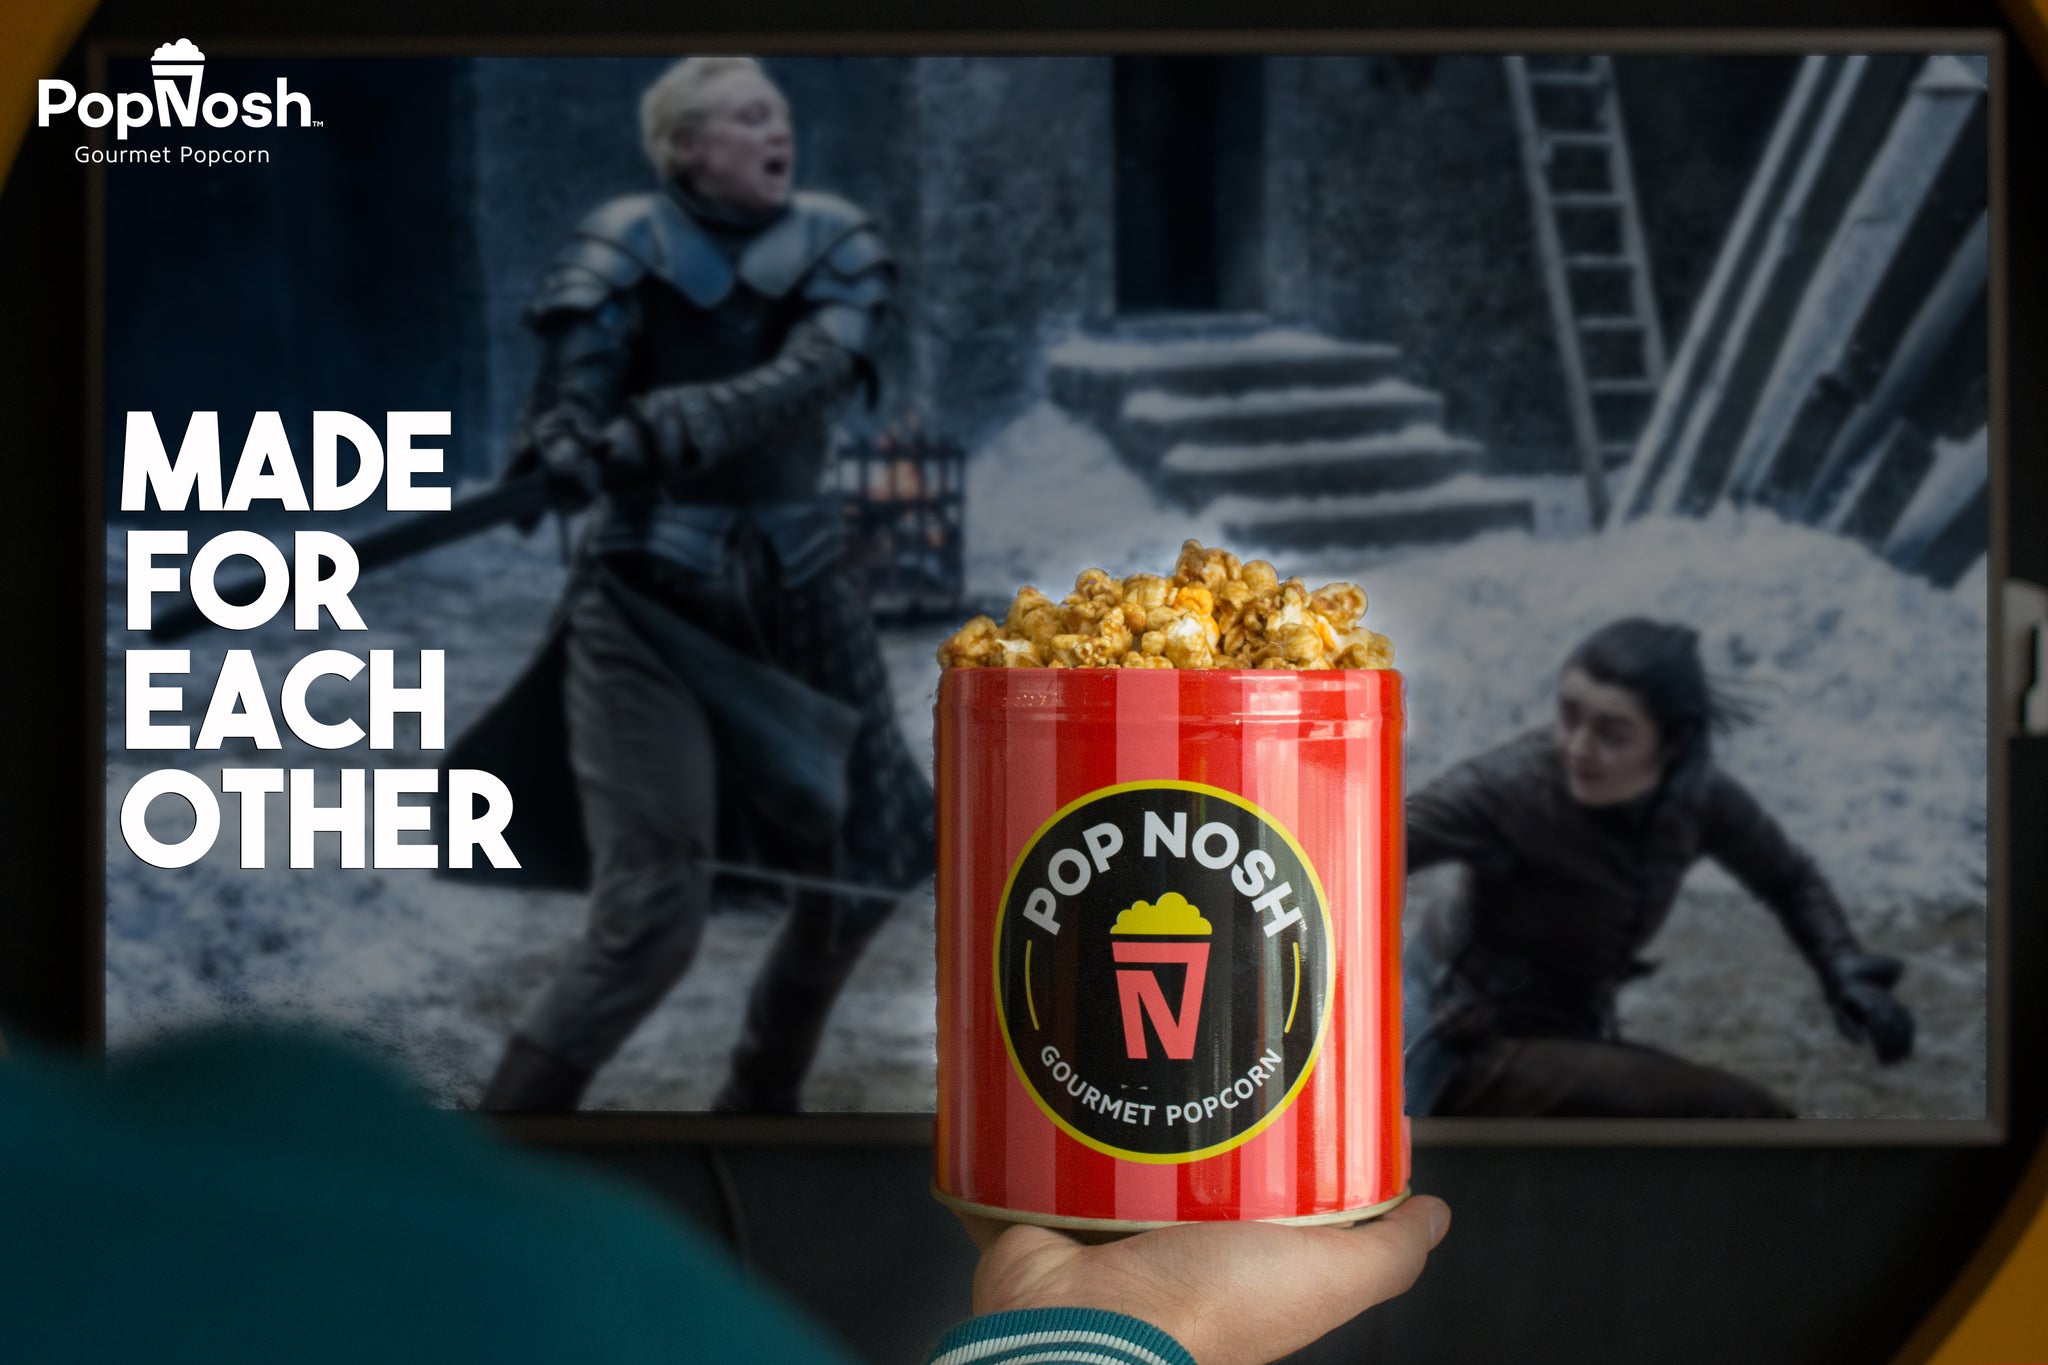 Here’s How You Can Watch GOT with Pop Nosh